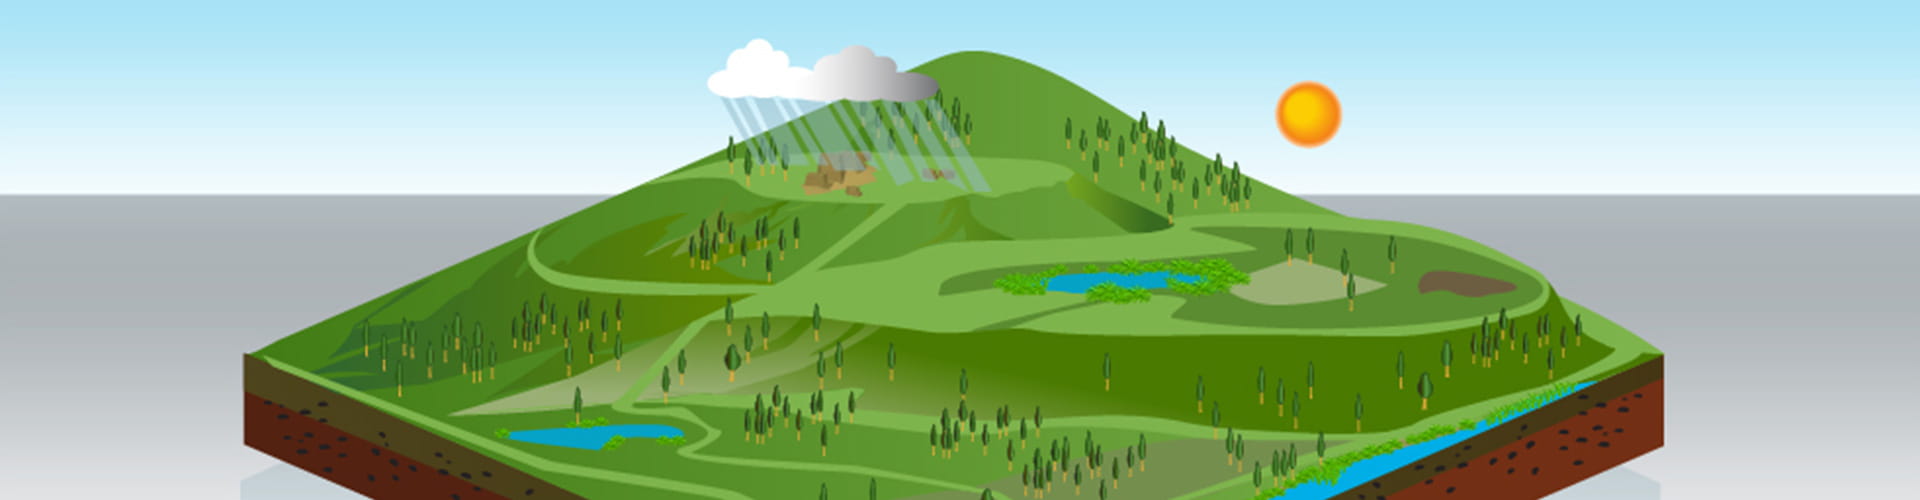 Isometric diagram of an old mine covered with grass, trees and lakes.